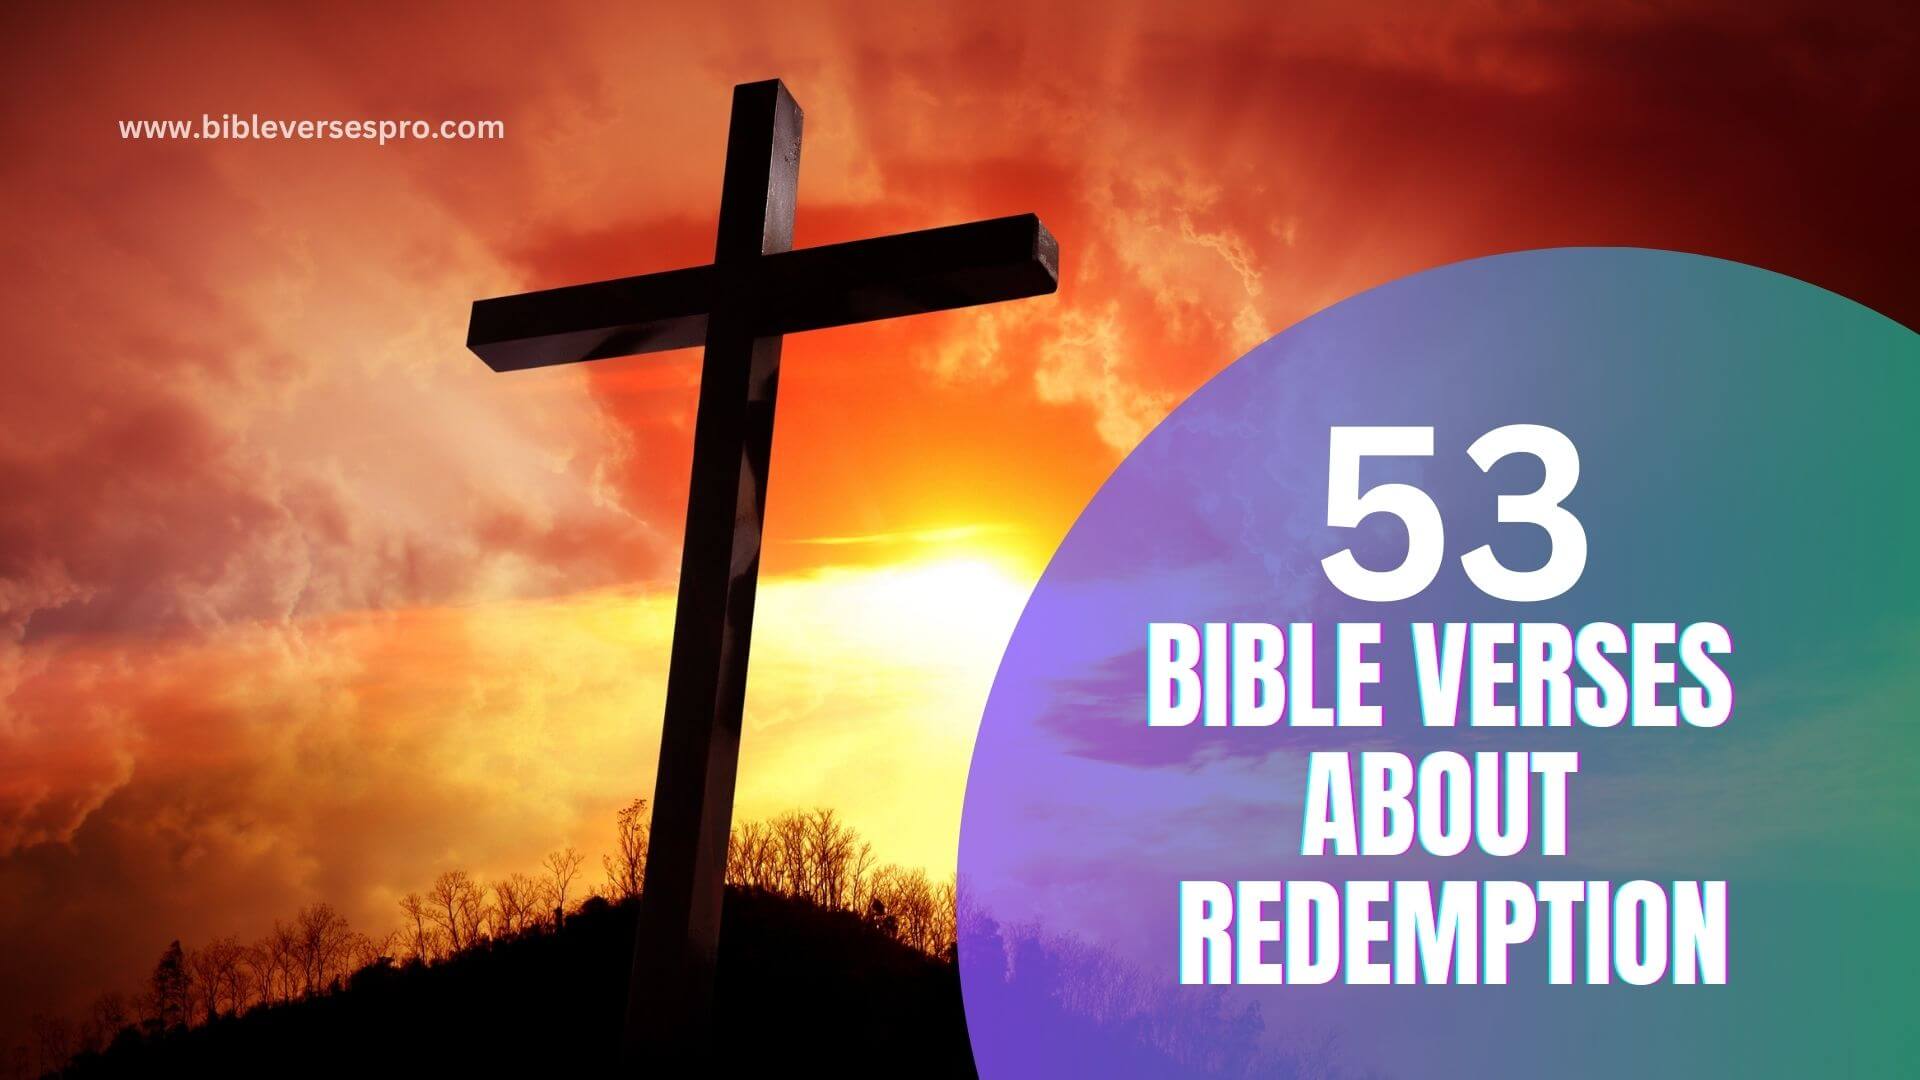 BIBLE VERSES ABOUT REDEMPTION (1)